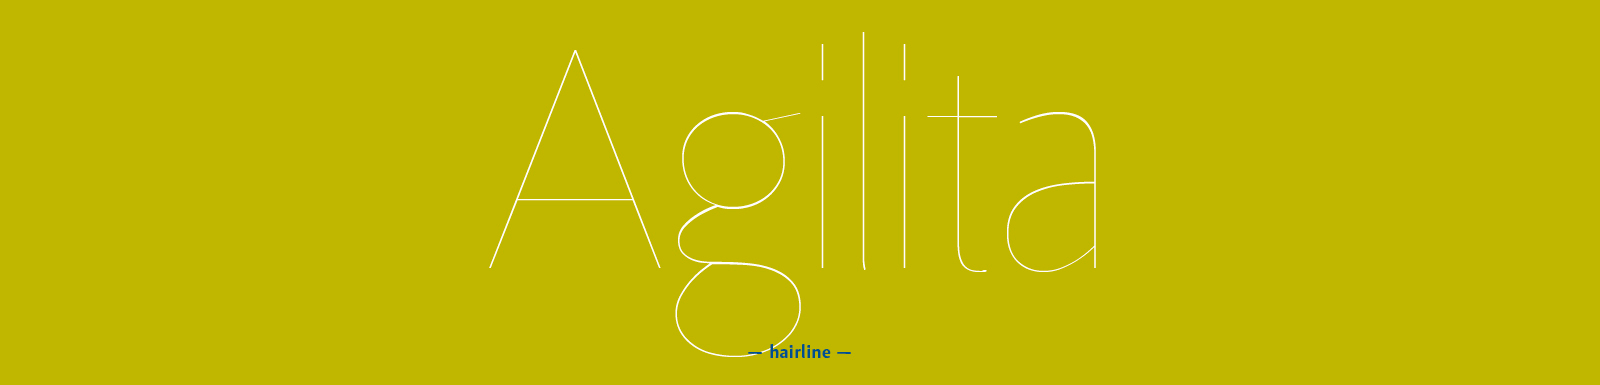 Agilita – Humanistic sanserif typeface in 33 weights